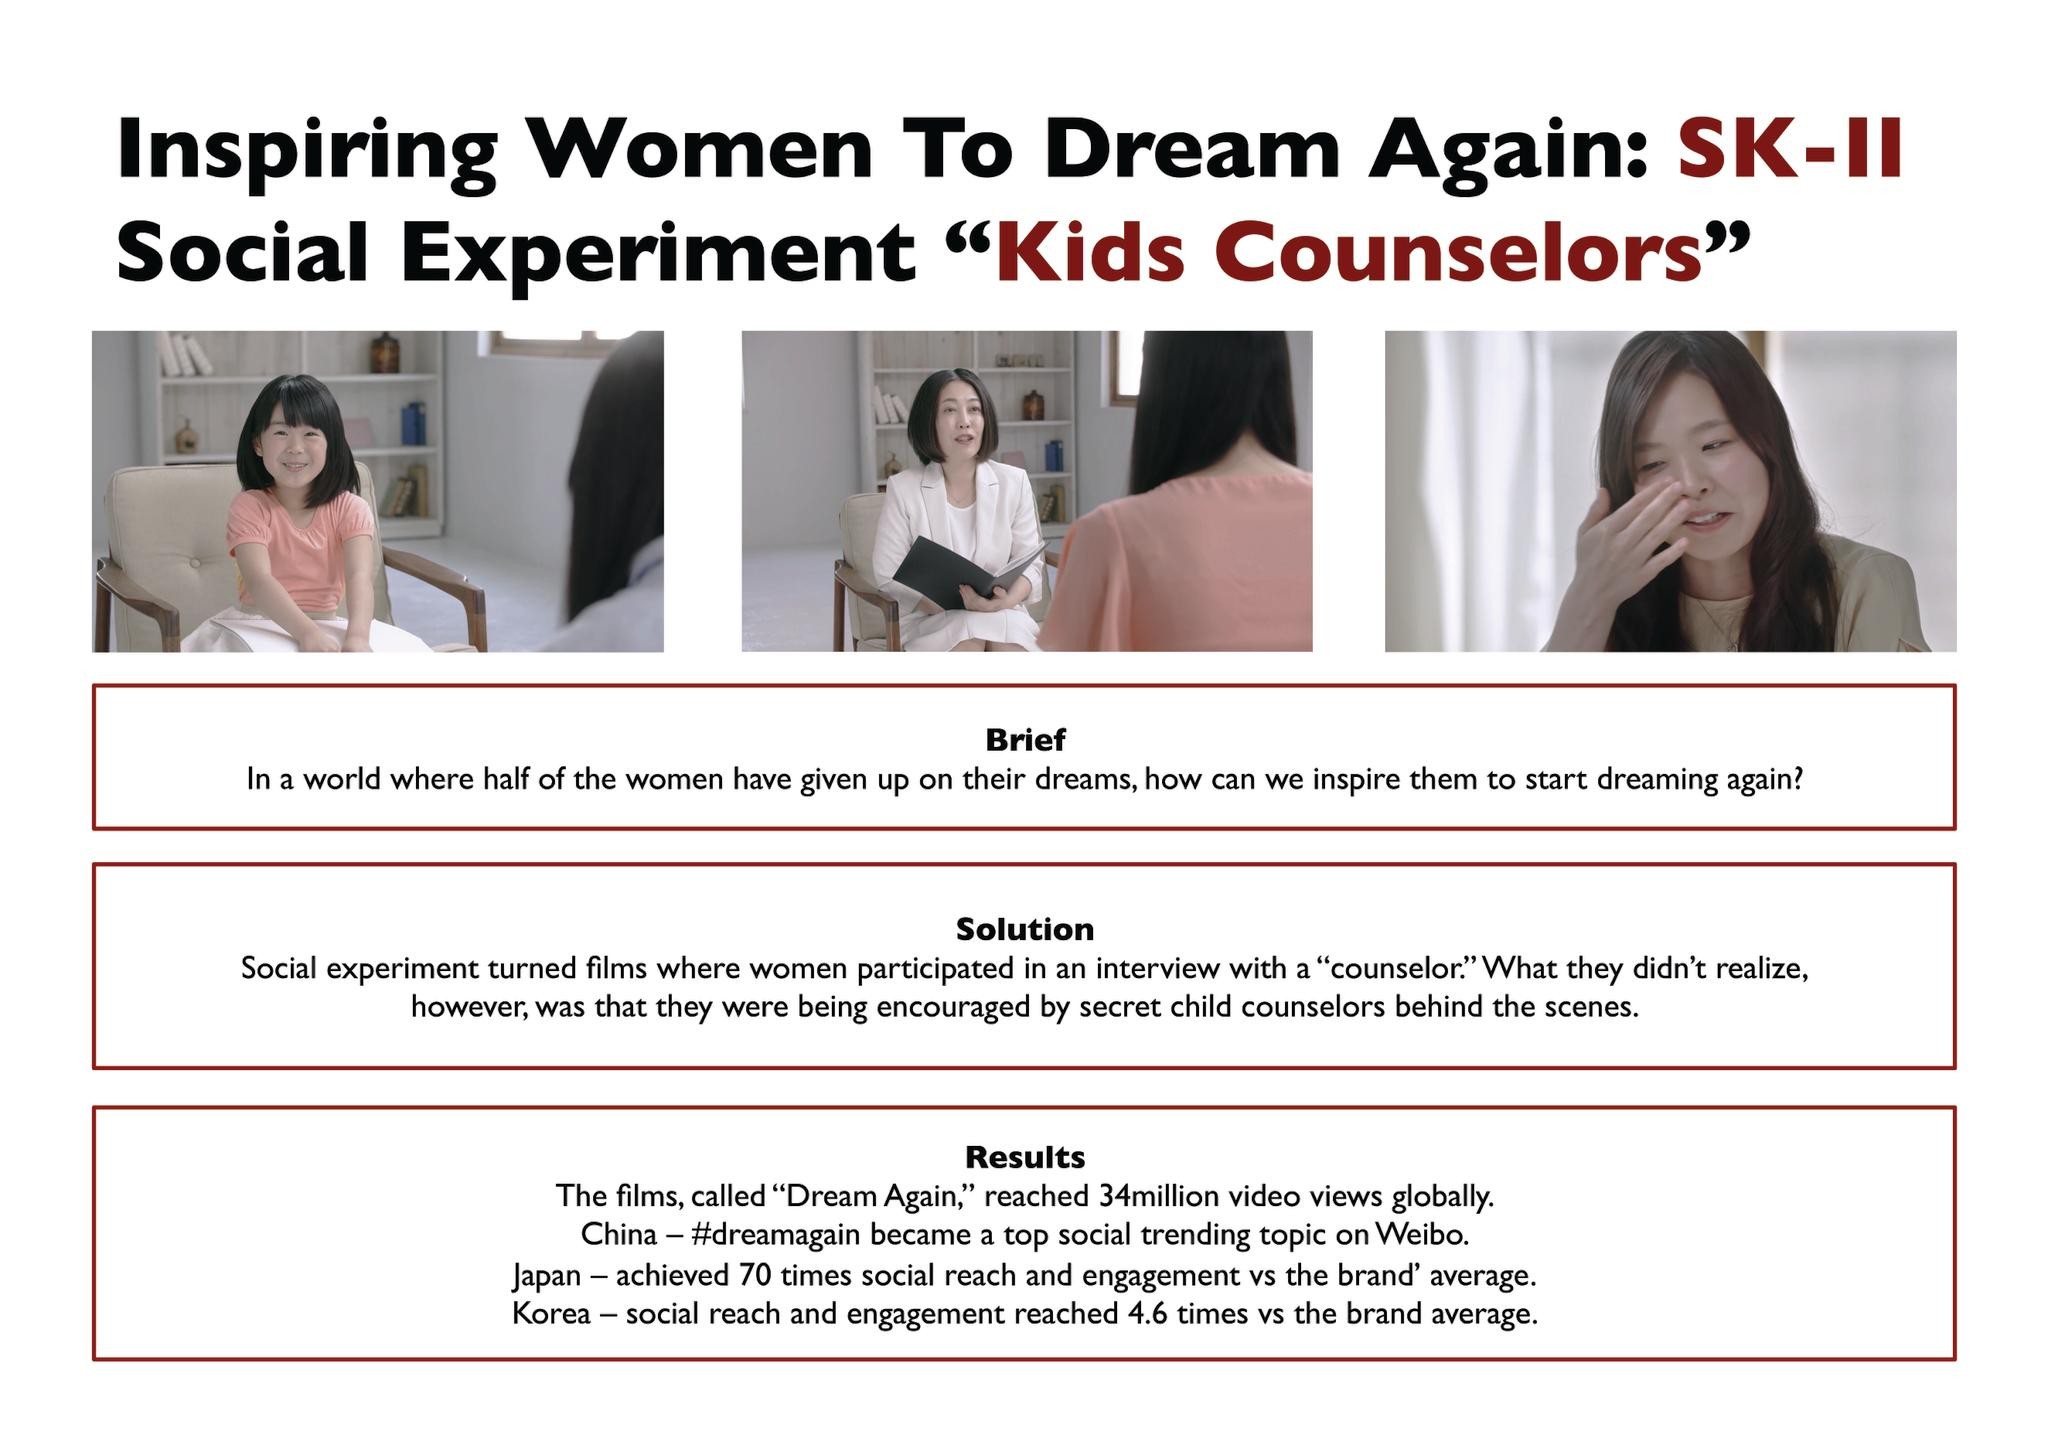 SK-II Social Experiment - "Kids Counselor"